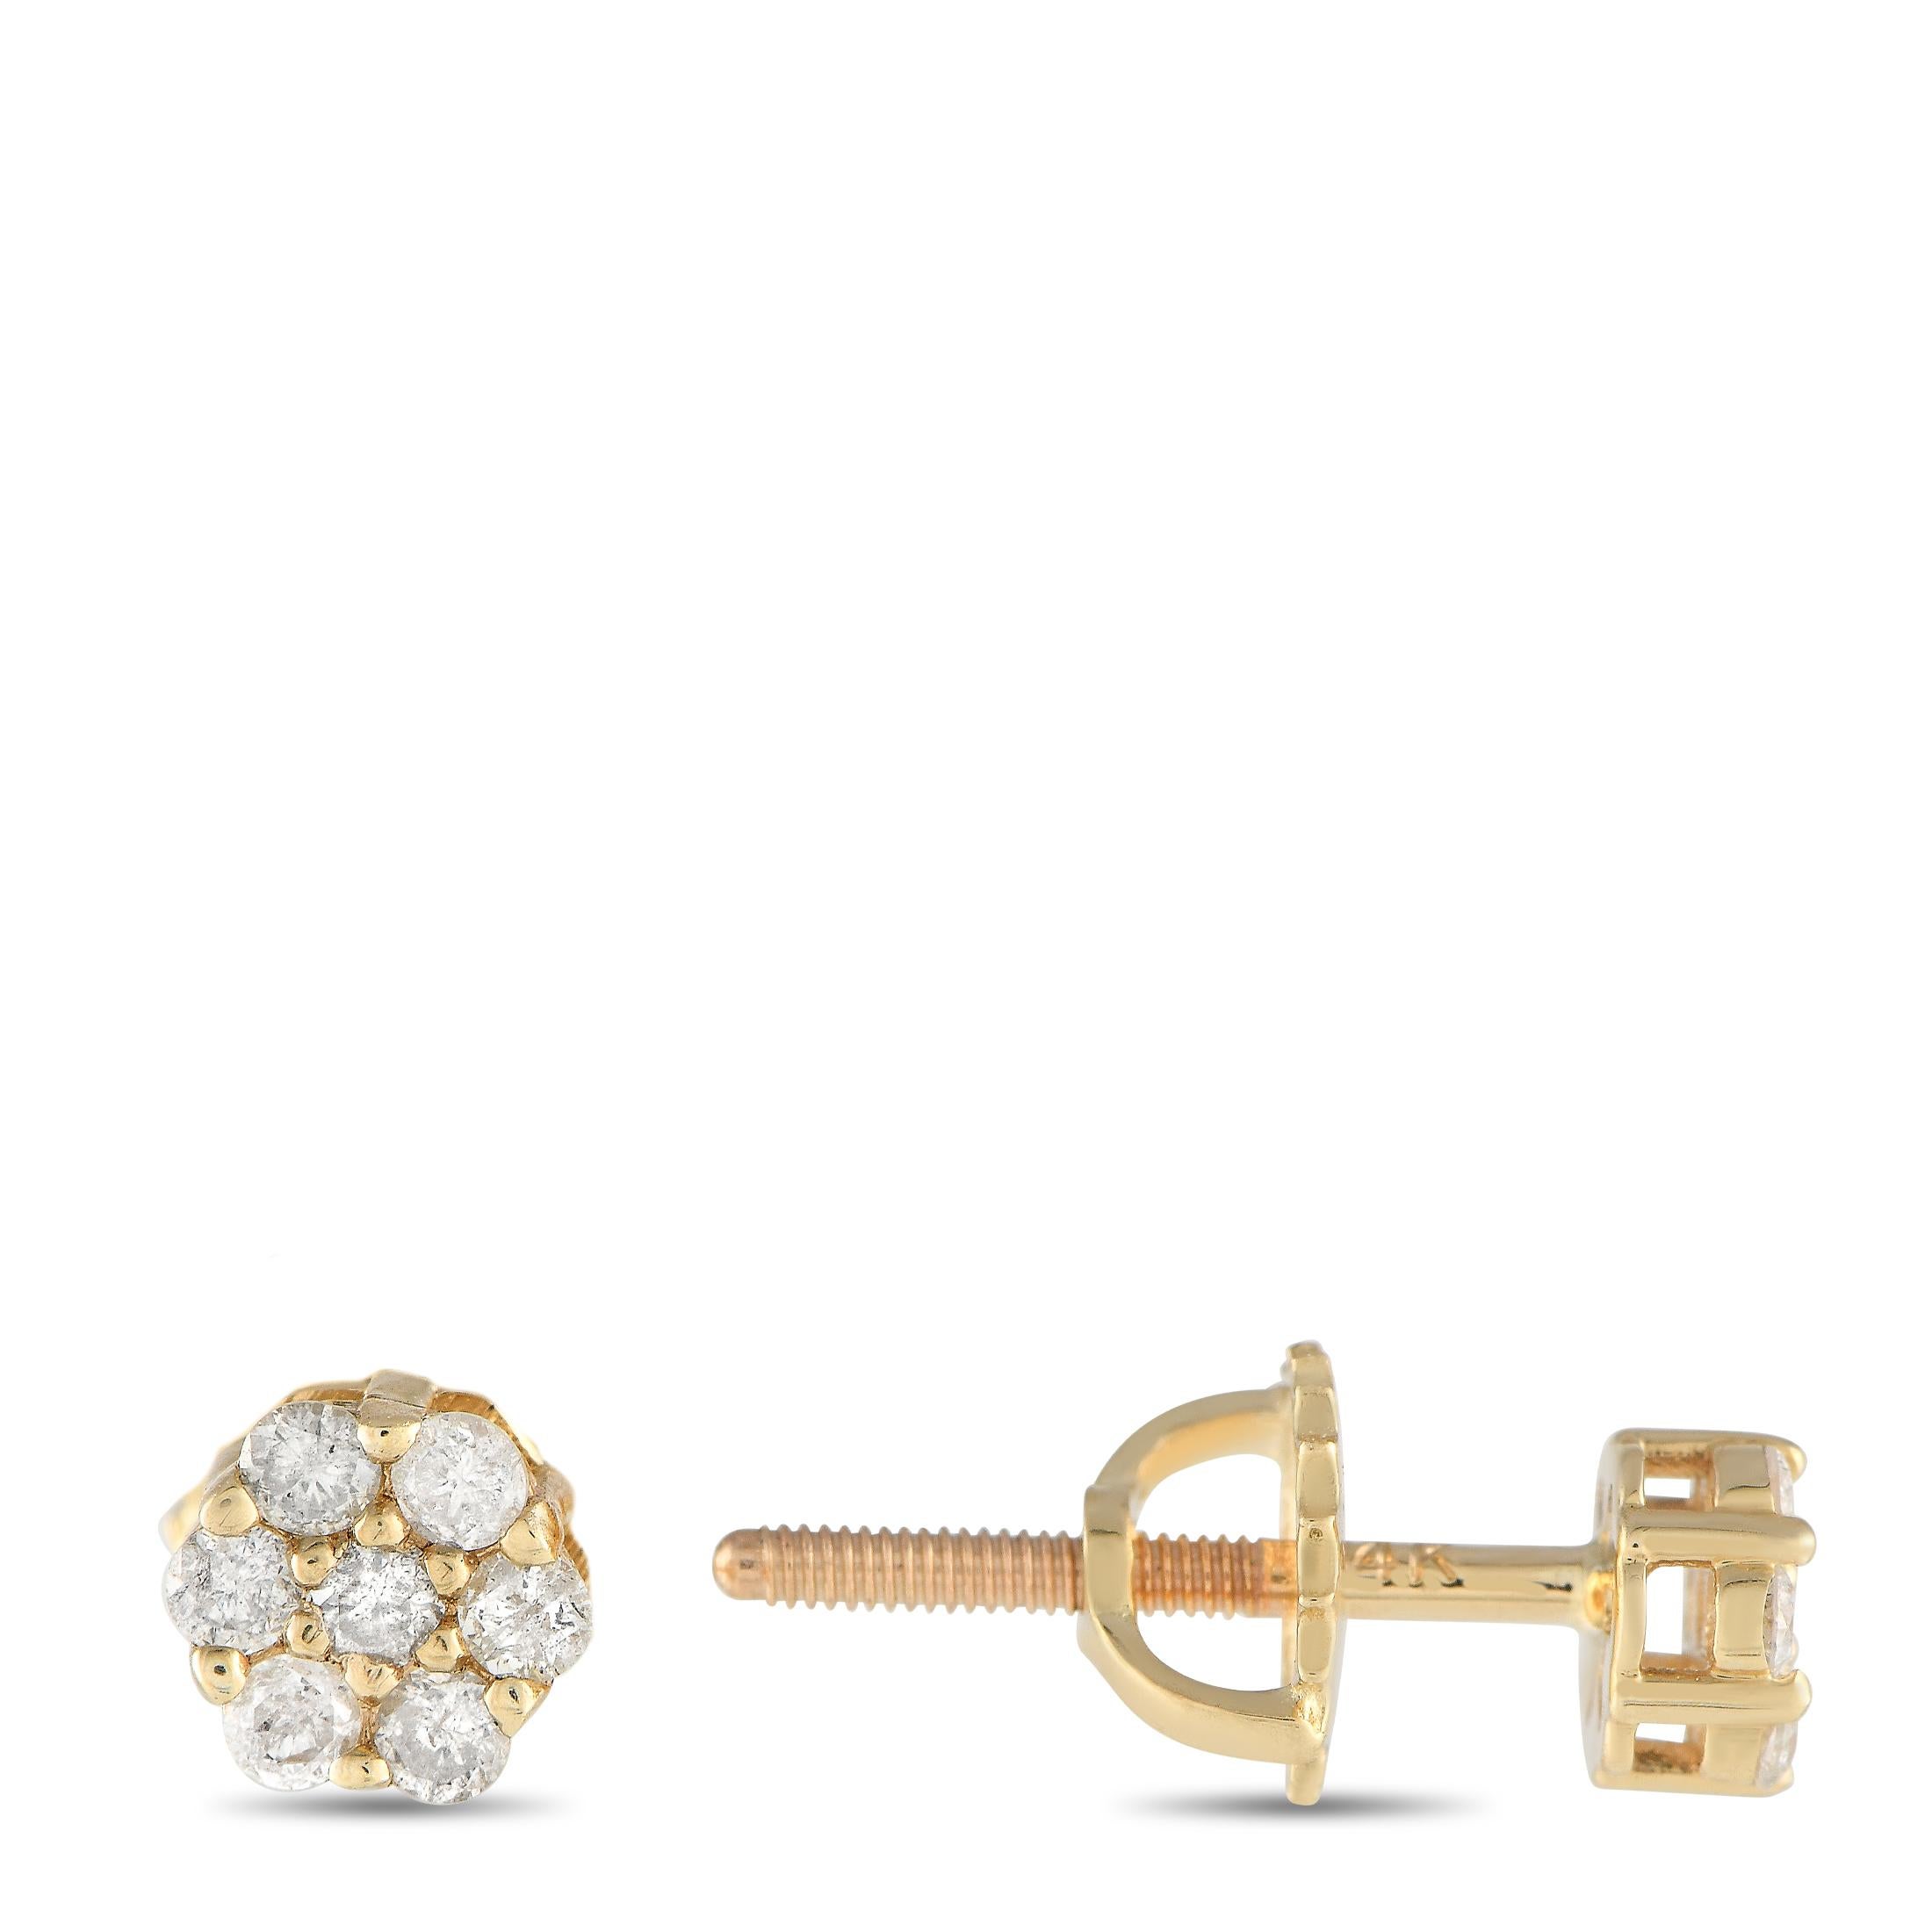 Upgrade your basic studs to these ear sparklers that have a little more to say. Each earring measures approximately 0.15